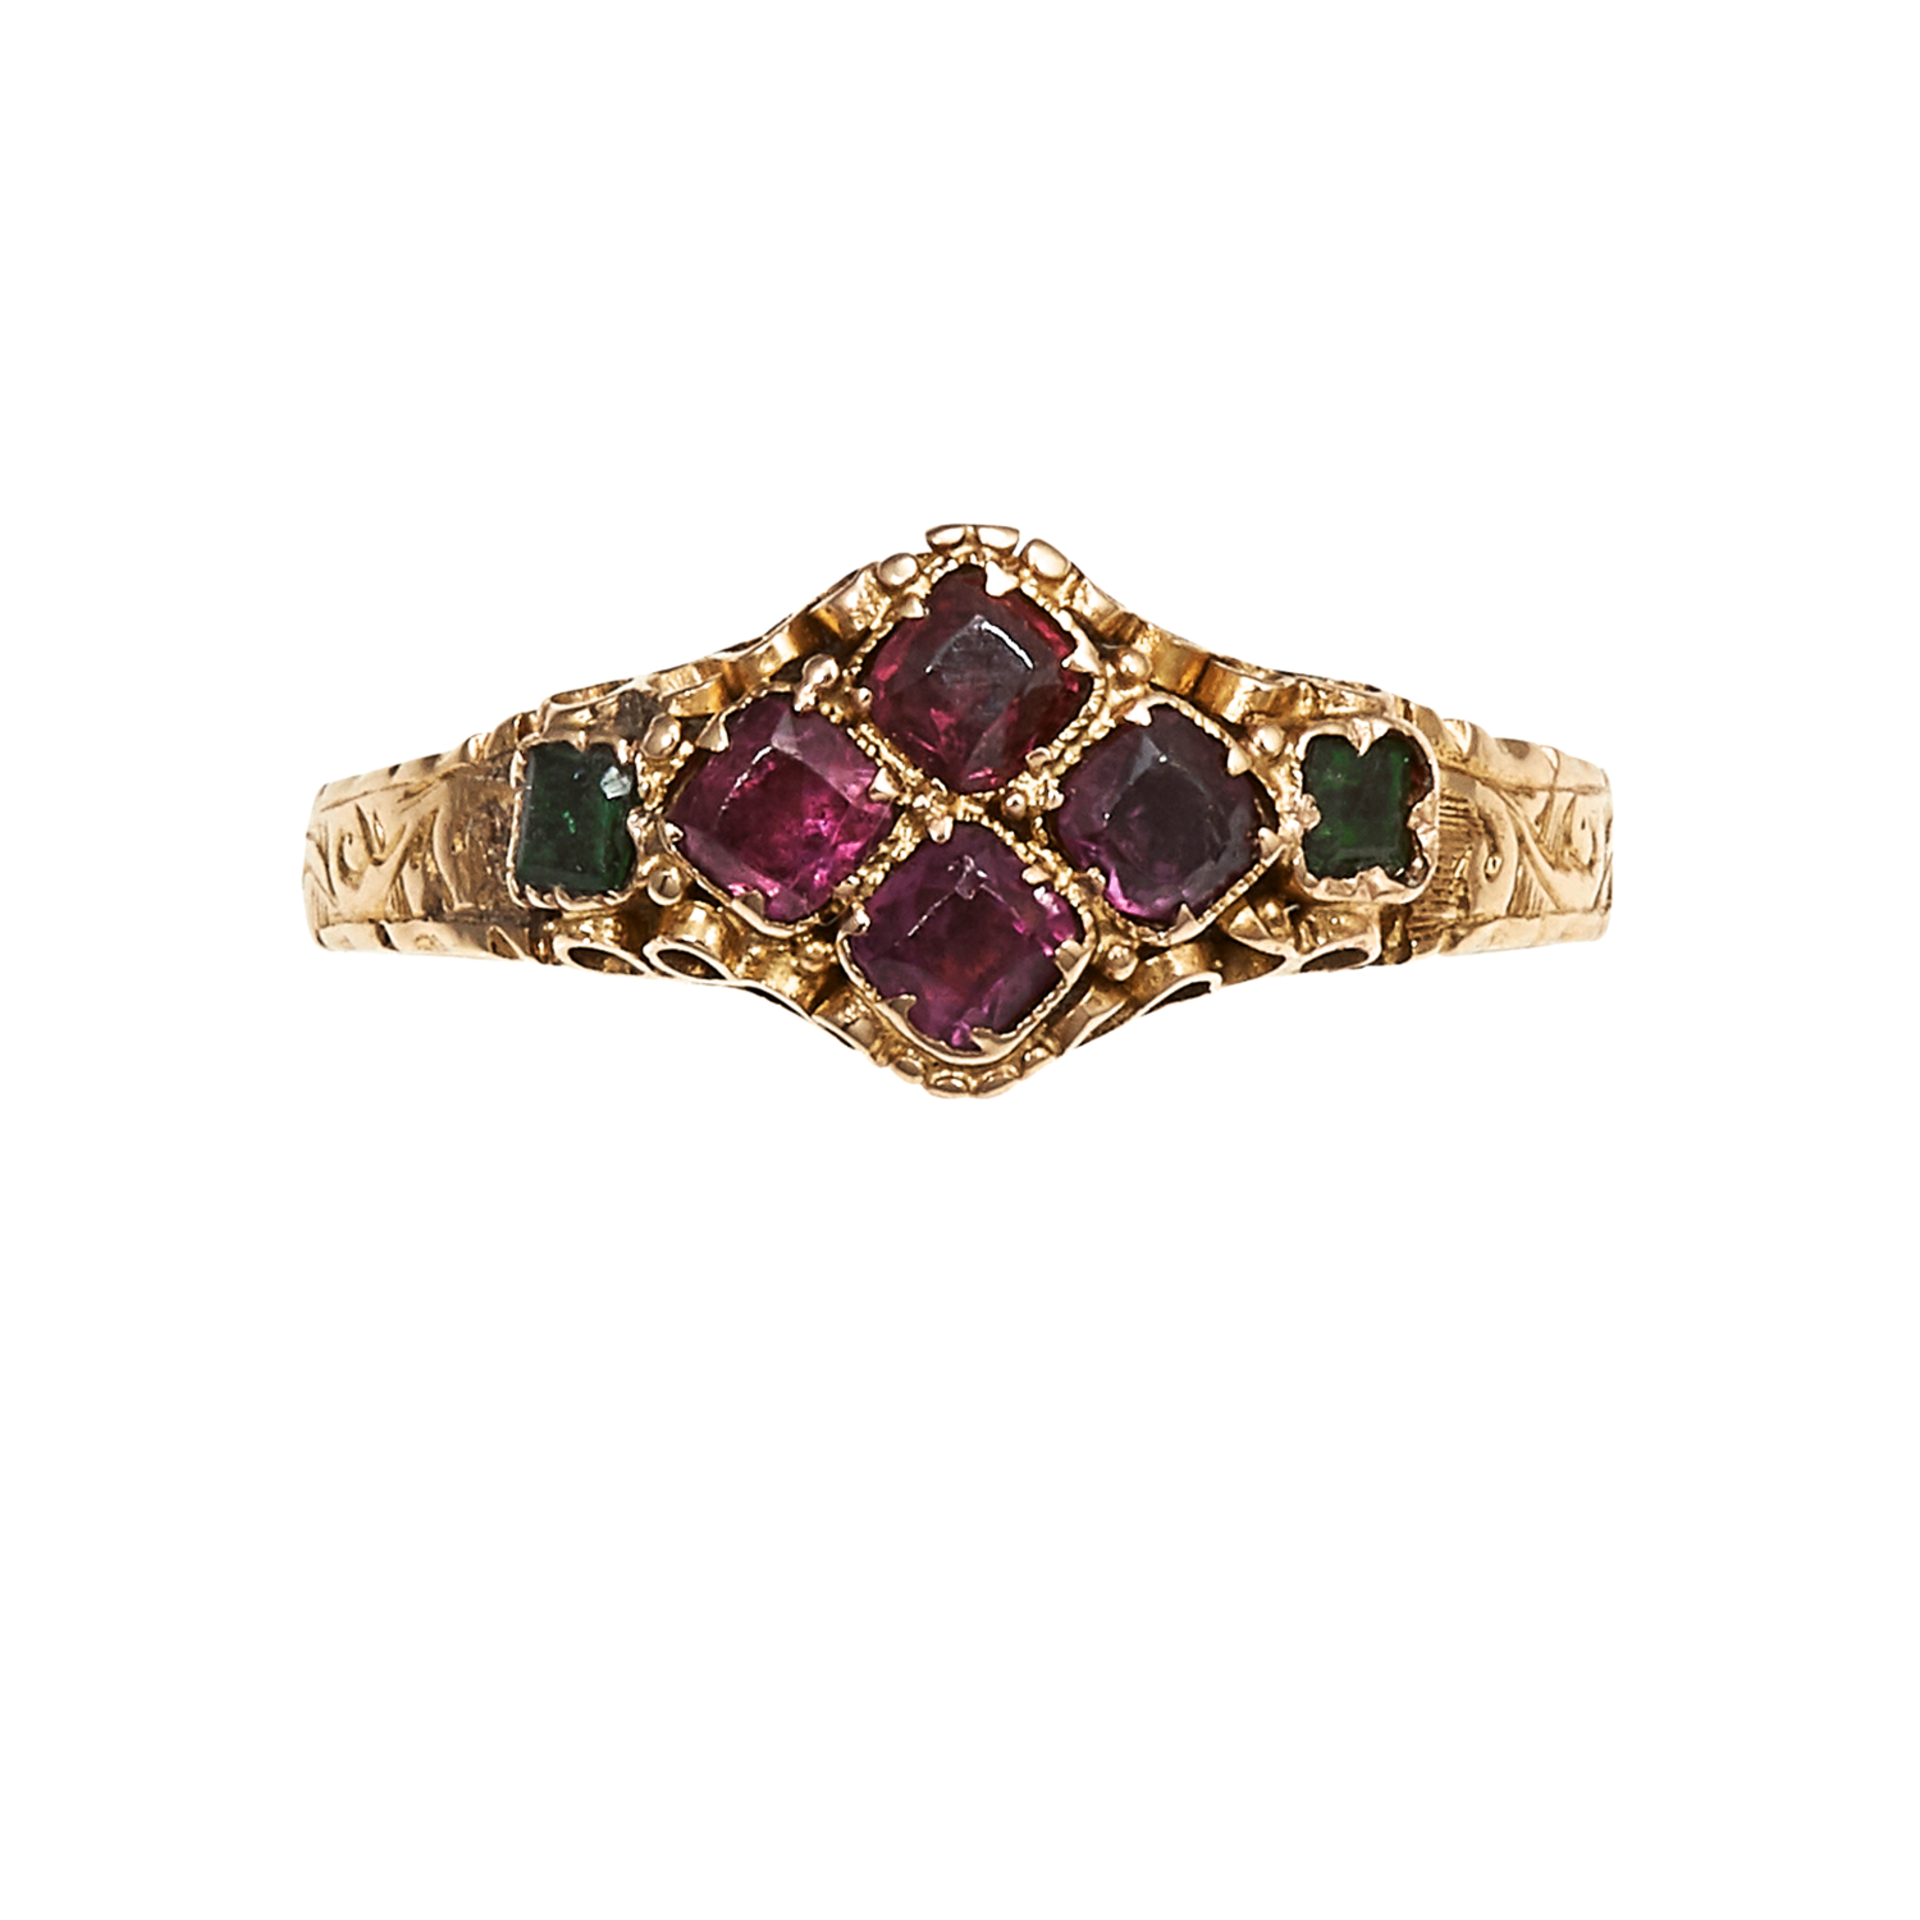 AN ANTIQUE GARNET AND EMERALD RING, CIRCA 1870 in 15 carat yellow gold, set with a quatrefoil